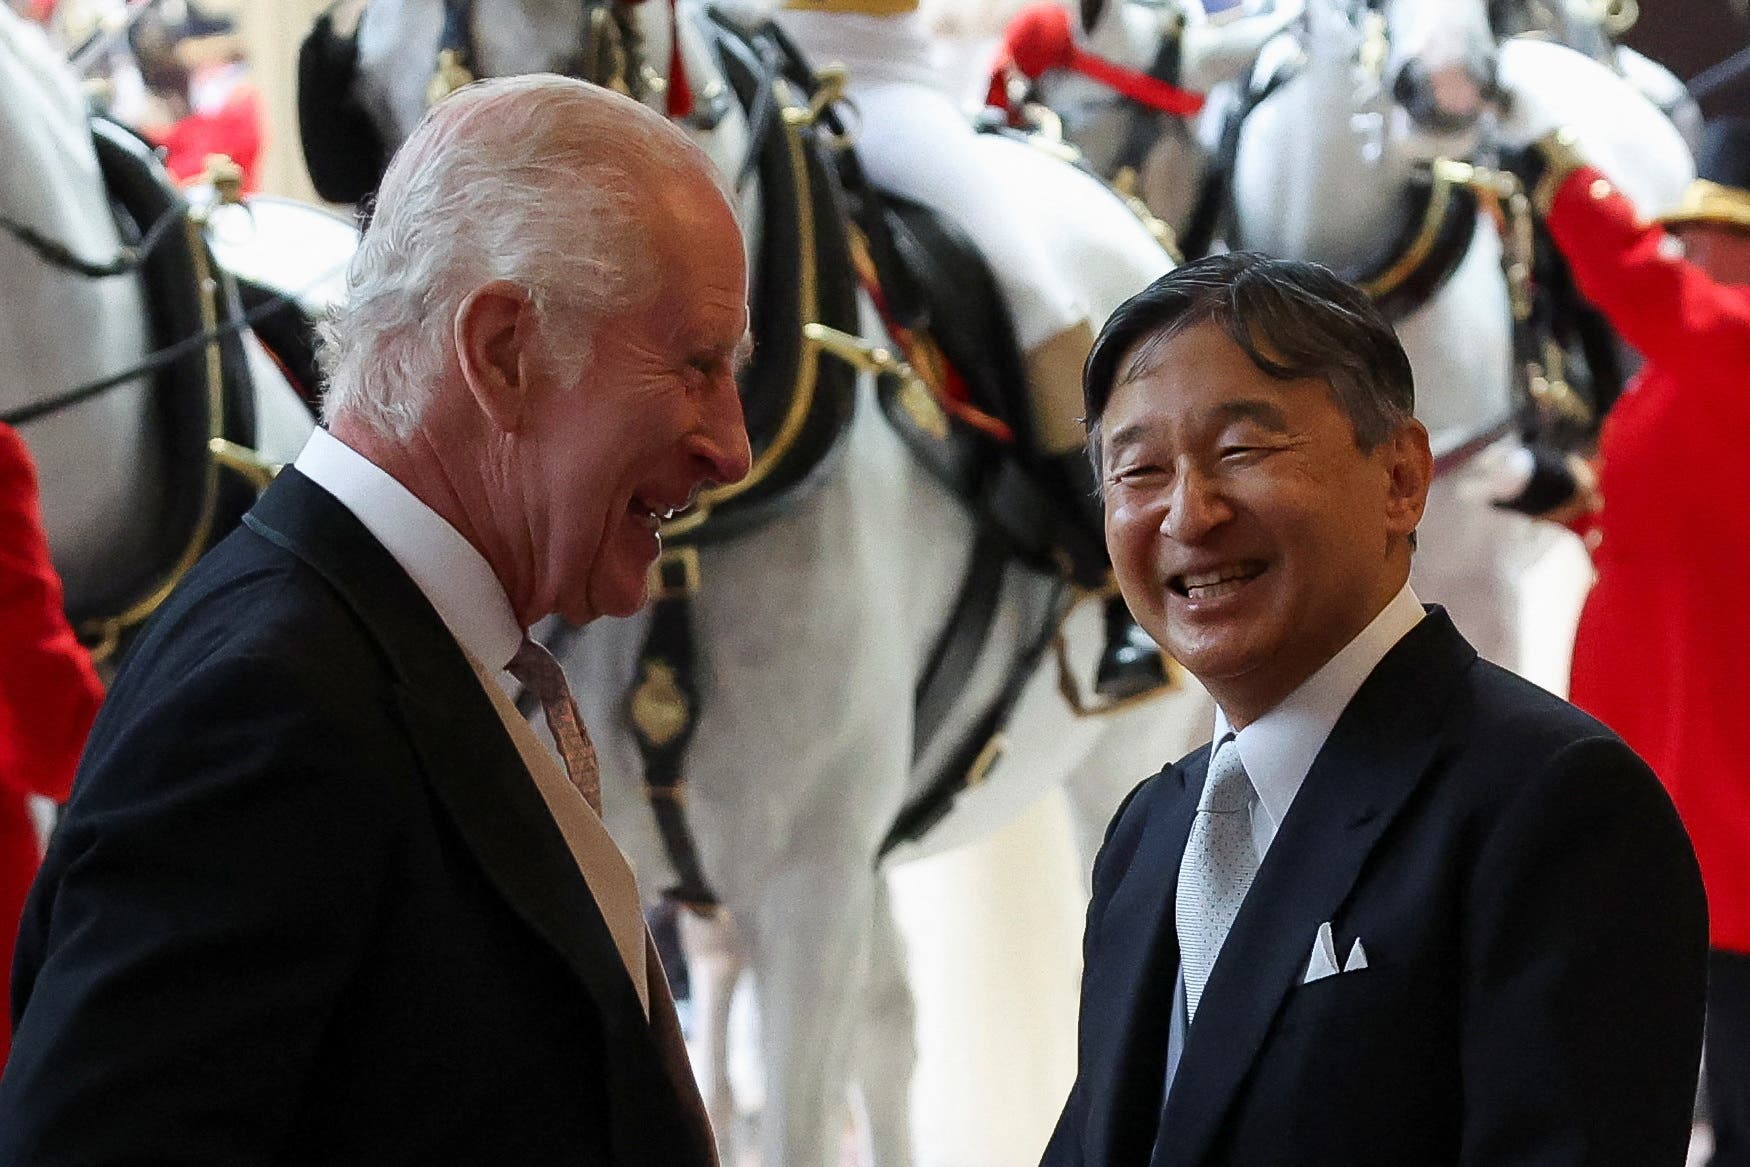 The King, left, and Emperor Naruhito arriving at Buckingham Palace (Suzanne Plunkett/PA)